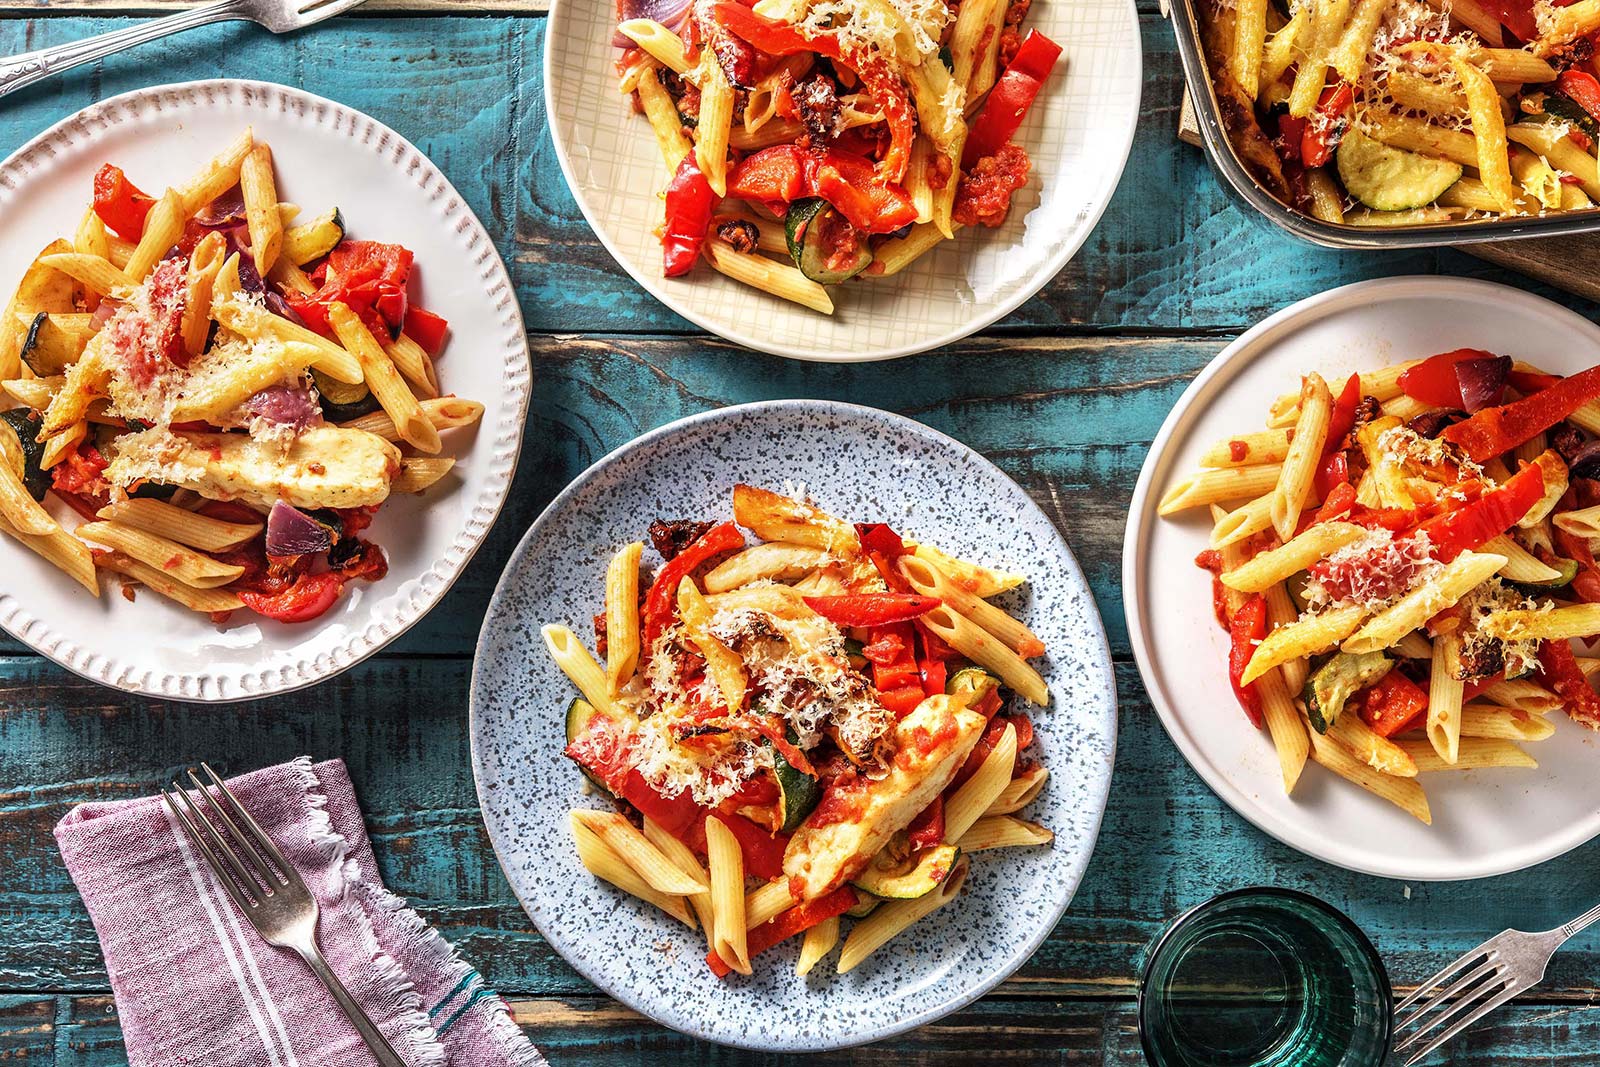 Don’t Freak Out, But We Can Guess Your Location Based on What You Eat Pasta